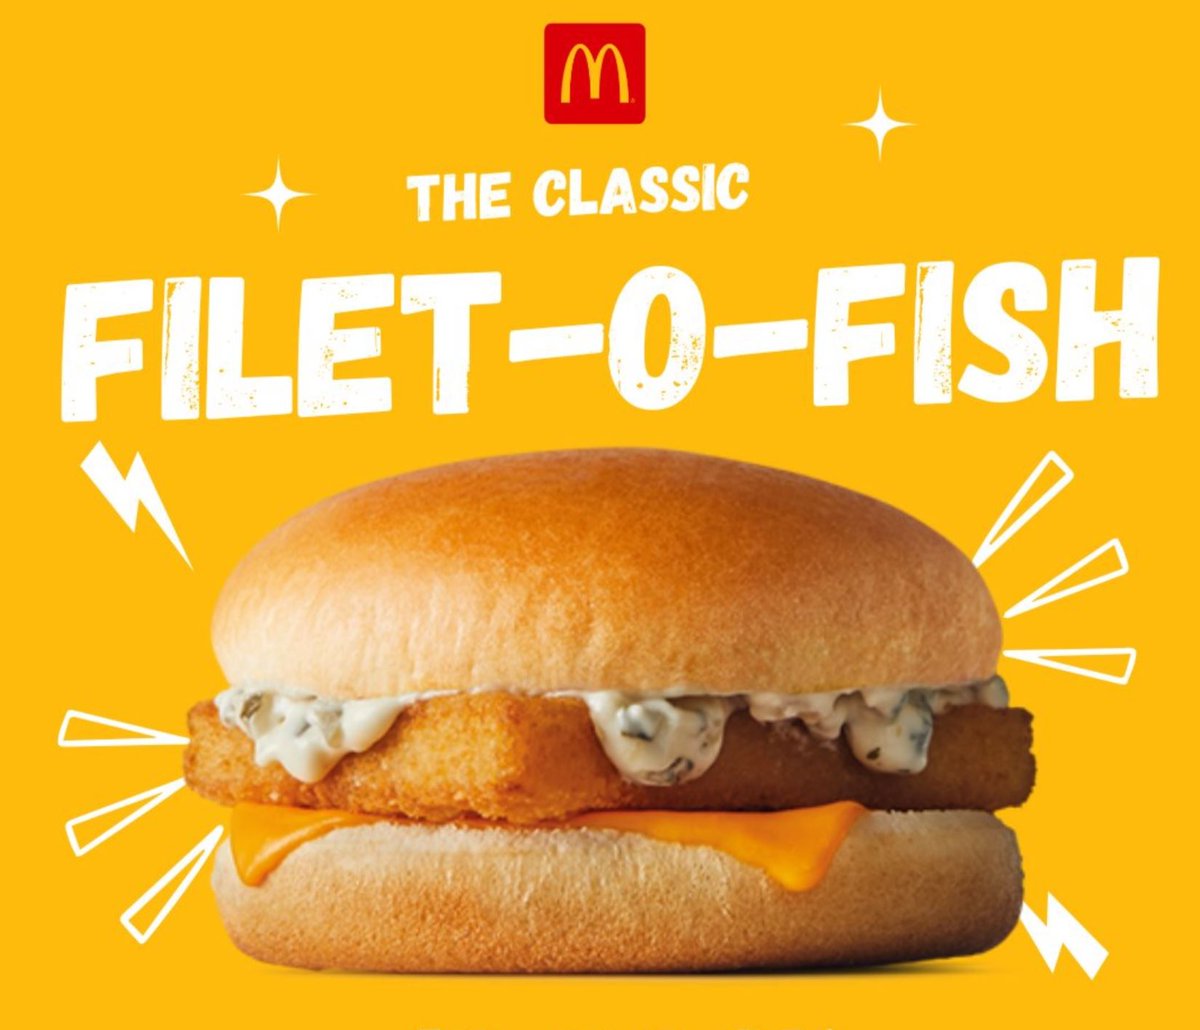 🎣🍔 It's Filet-O-Fish Friday at McDonald's! Swing by and satisfy your Friday cravings with a taste that's sure to hook you! 🐟😋 #FiletOFishFriday #FishyFriday #WeekendVibes #Prestonl 🍟🎉